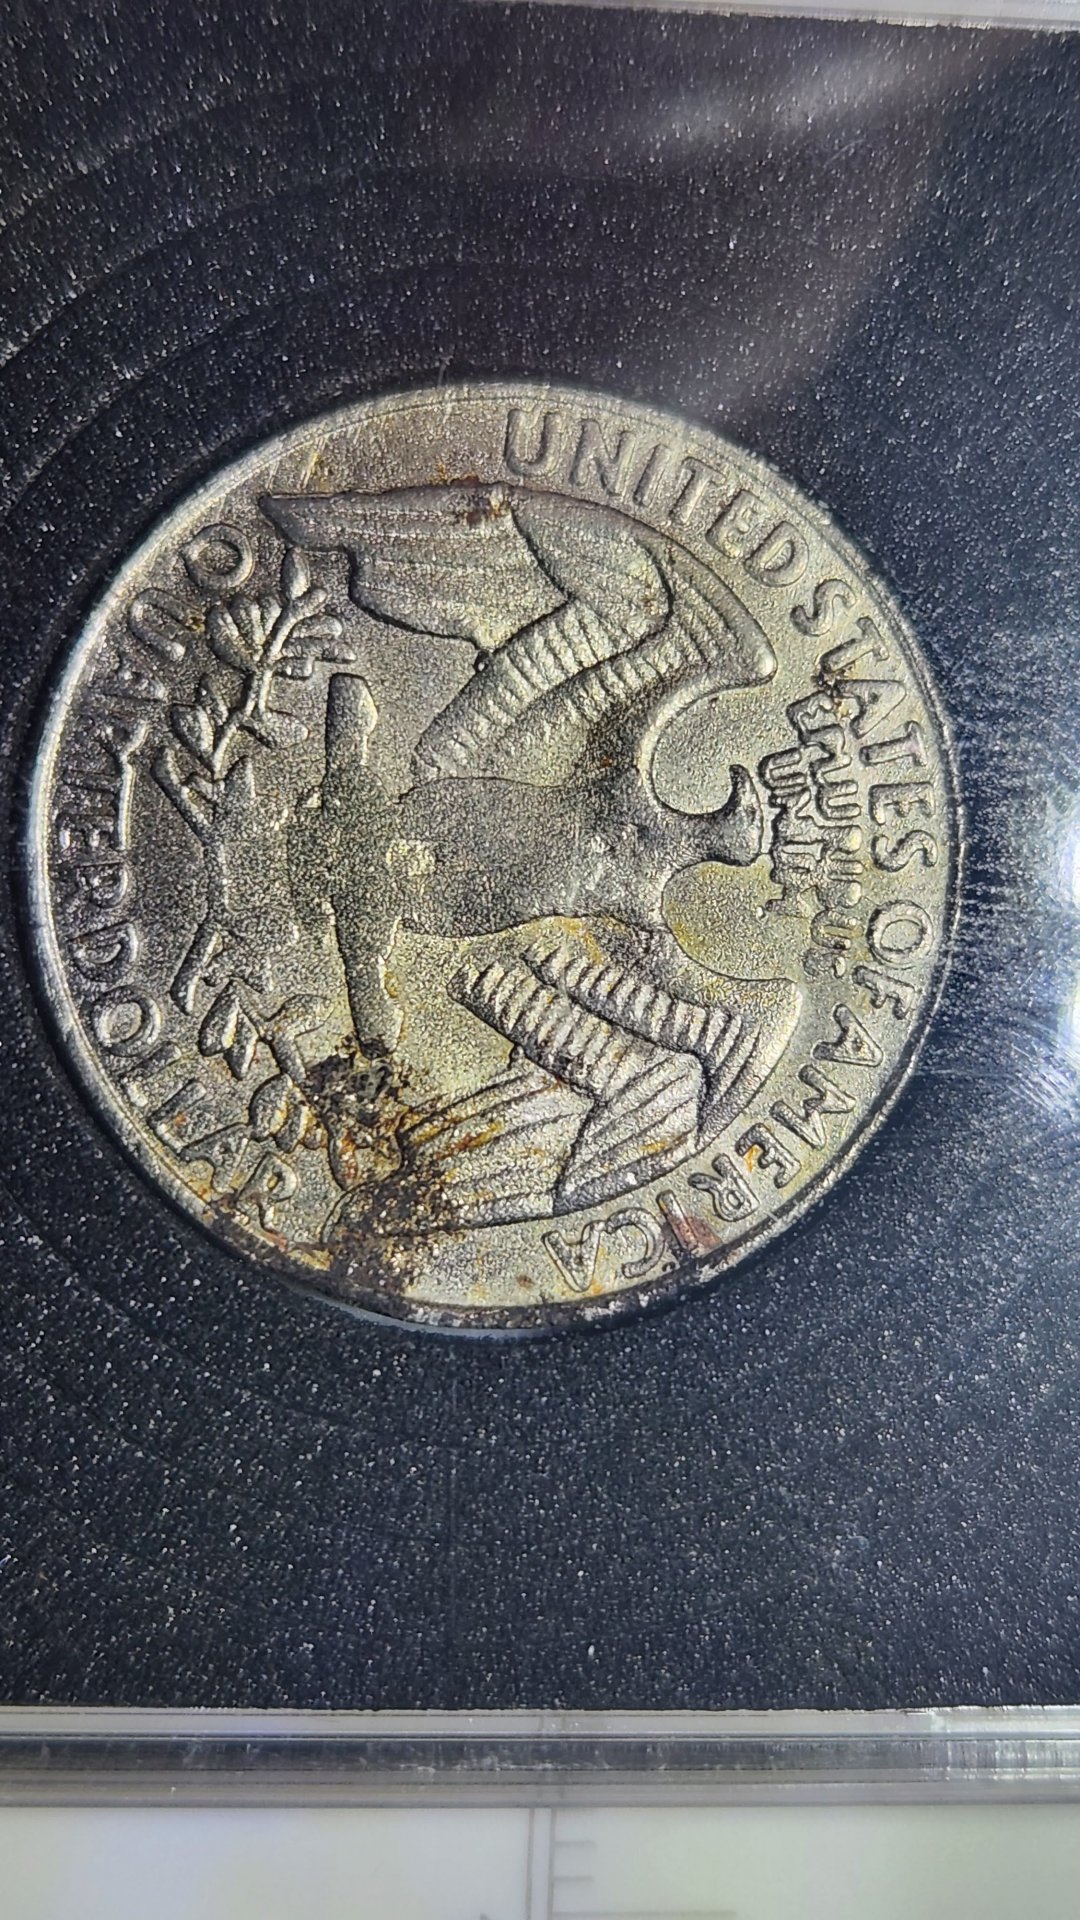 1982 Clad Quarter No edge and Leafs dont reach Eagle Wings (Back).jpg